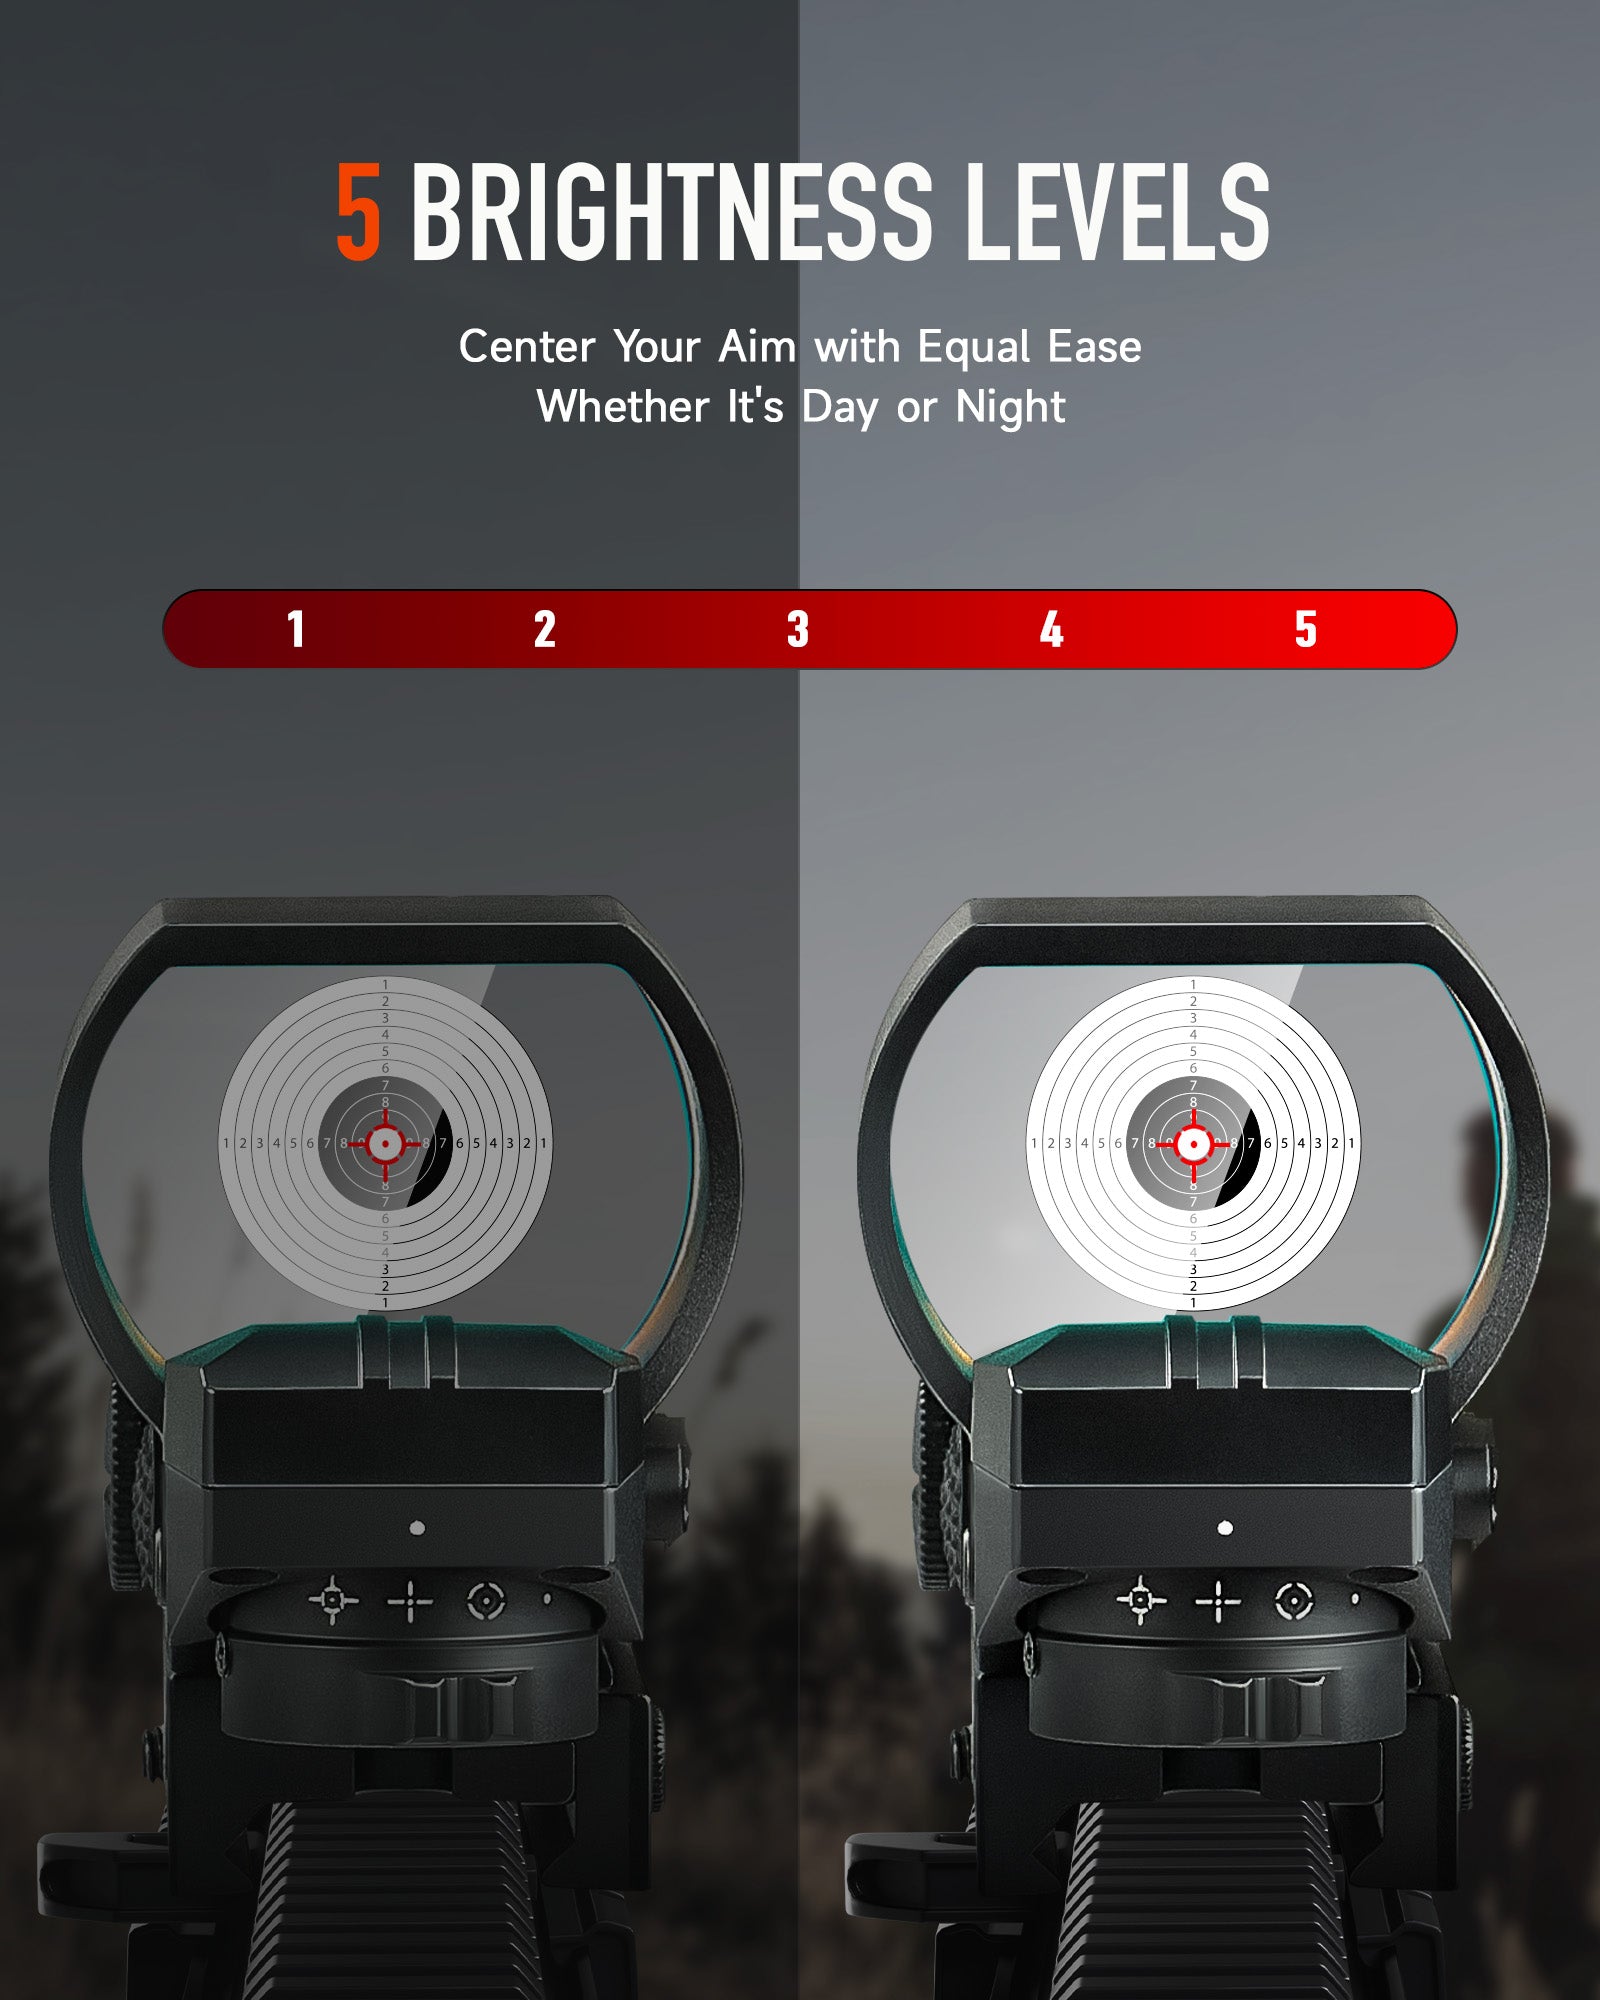 1x28mm Reflex Sight Red Laser Combo, 3 MOA Red Dot Sight with 5 Brightness Levels